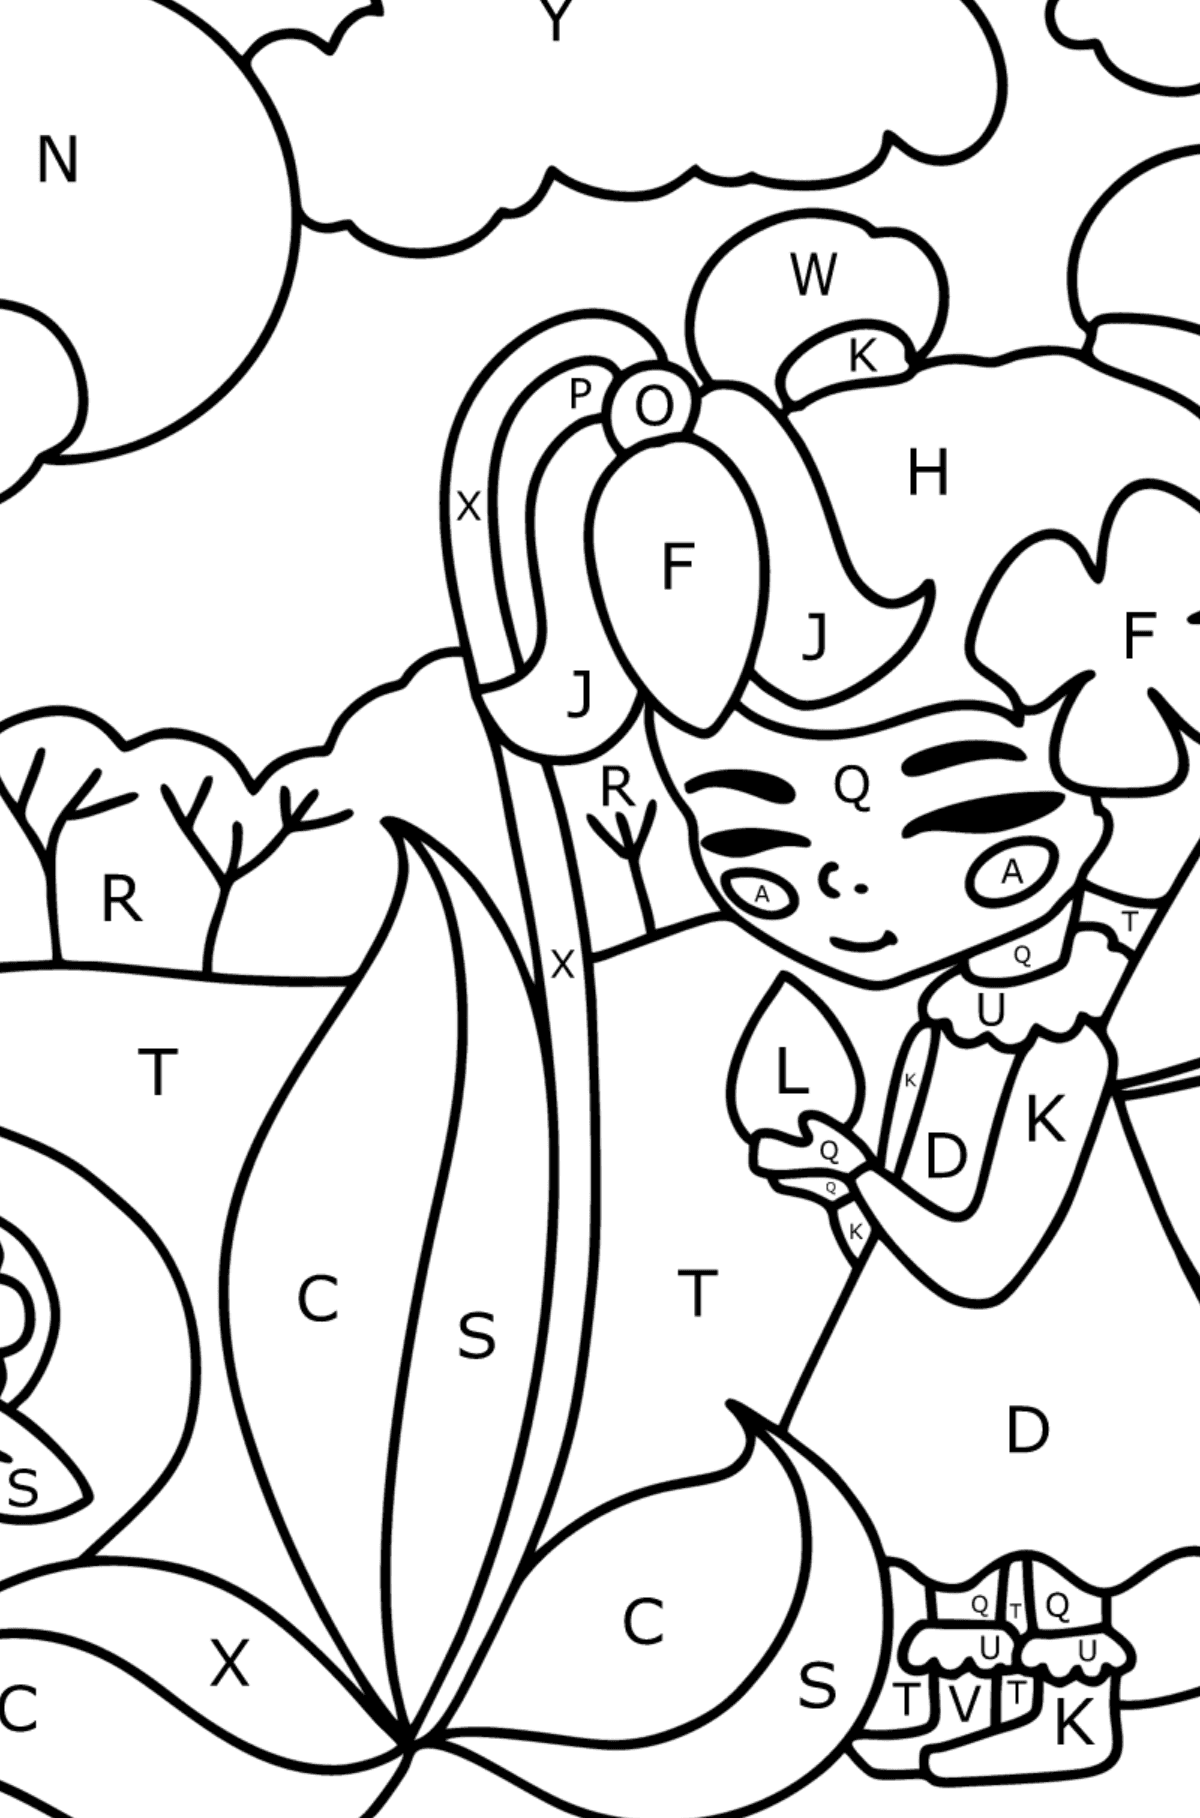 Fairy on a forest path coloring page - Coloring by Letters for Kids